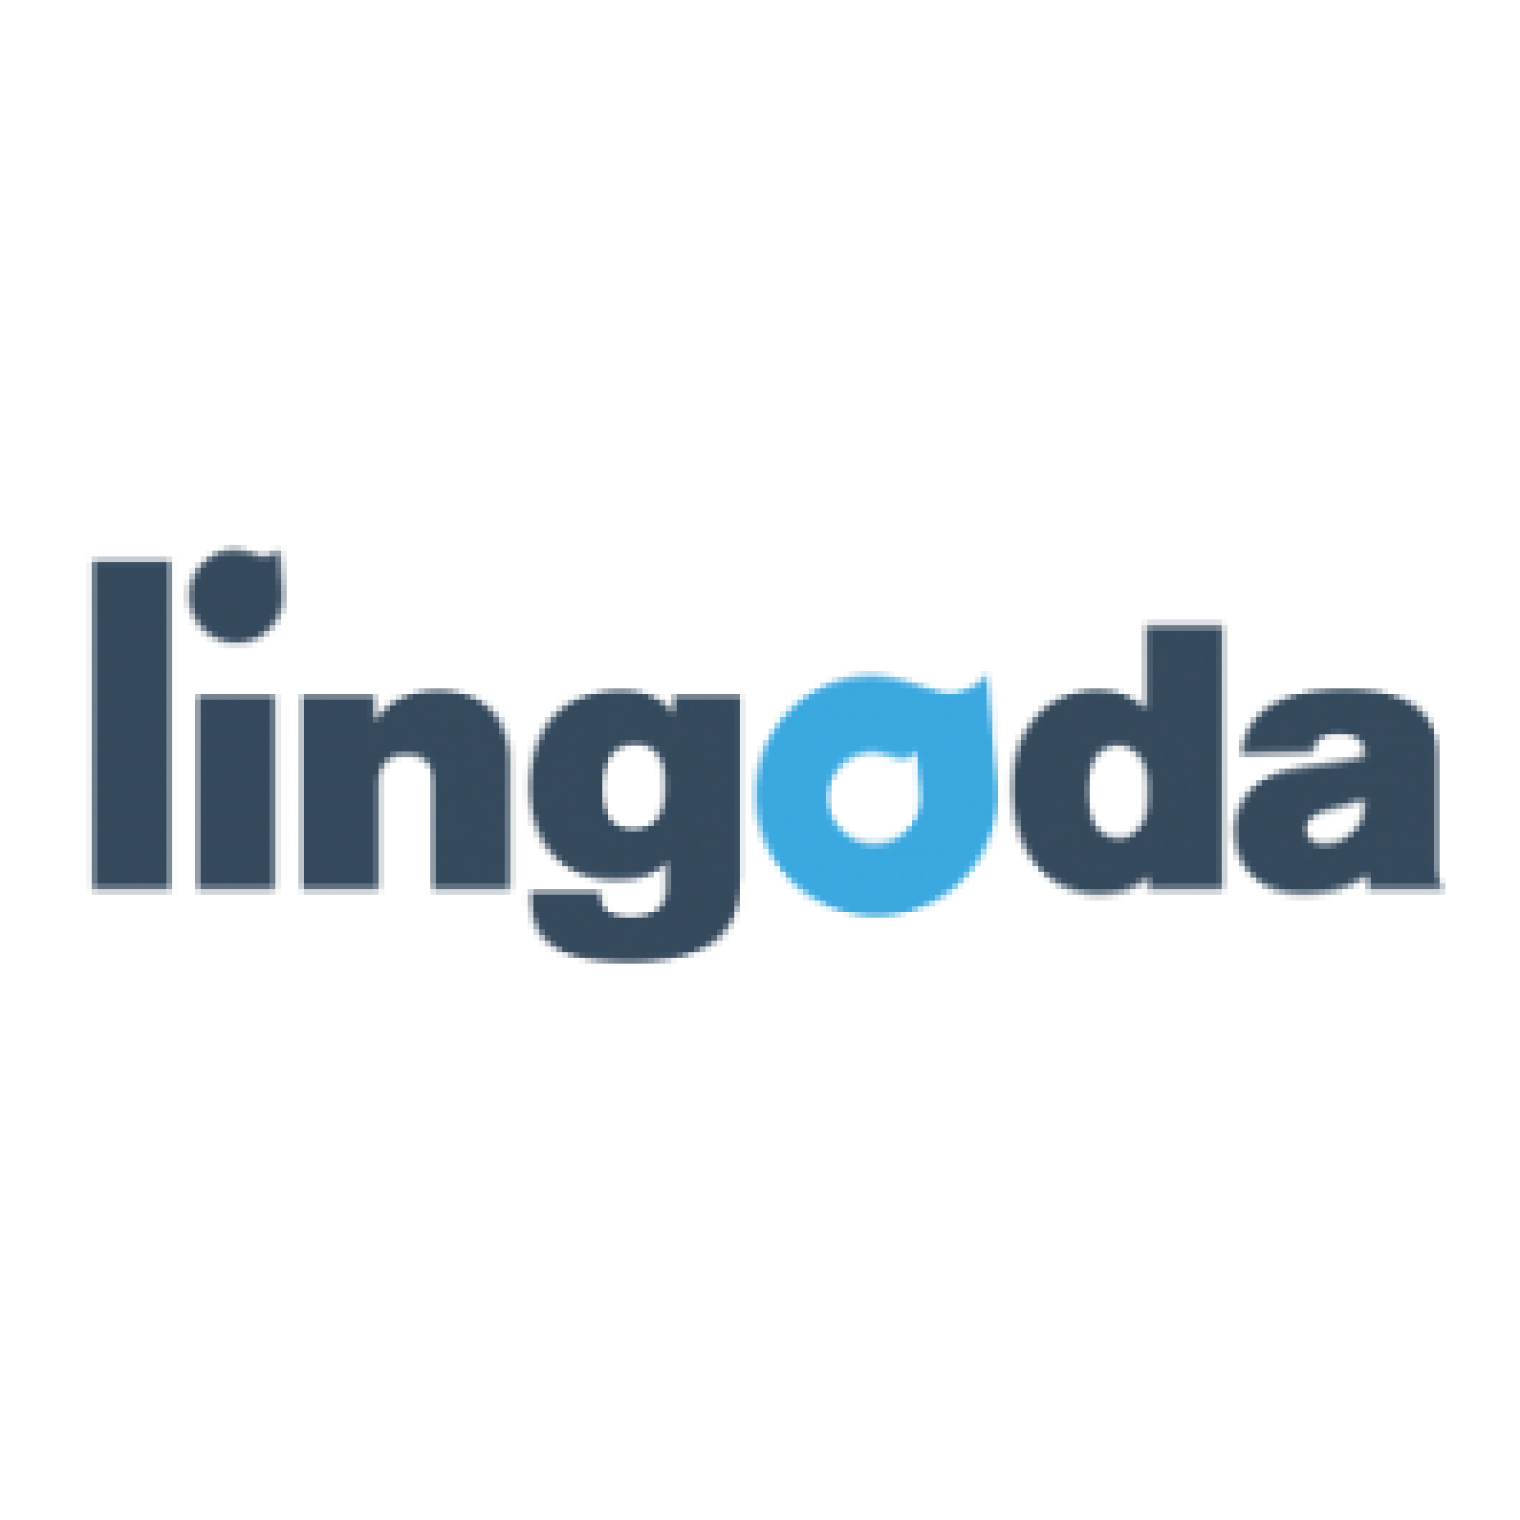 Welcome to our new associate member LINGODA